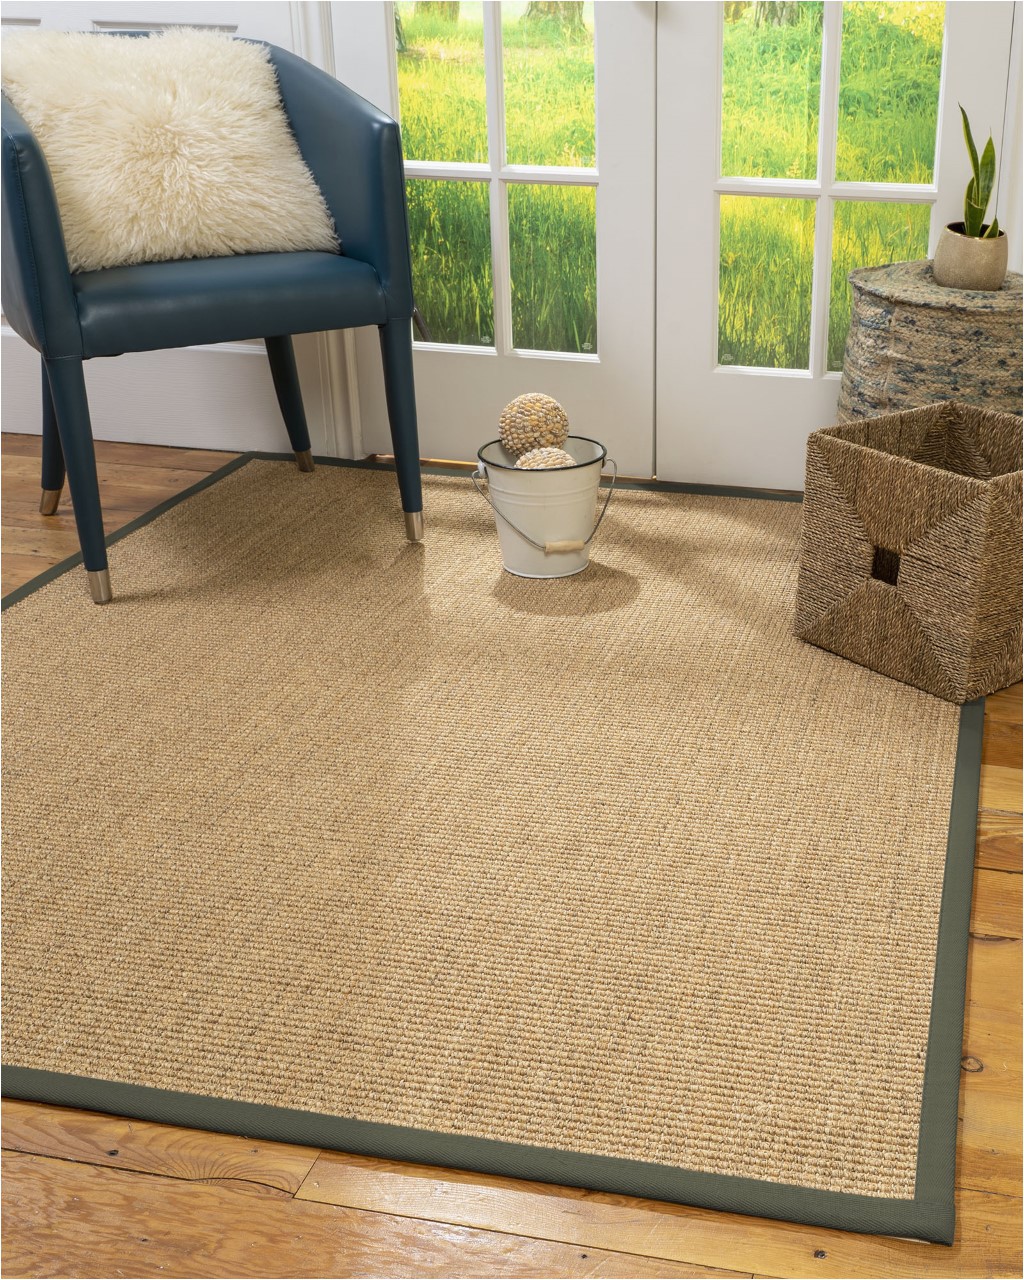 10 by 10 Square area Rugs Natural area Rugs Studio Custom Sisal Rug 10 Square Green Border